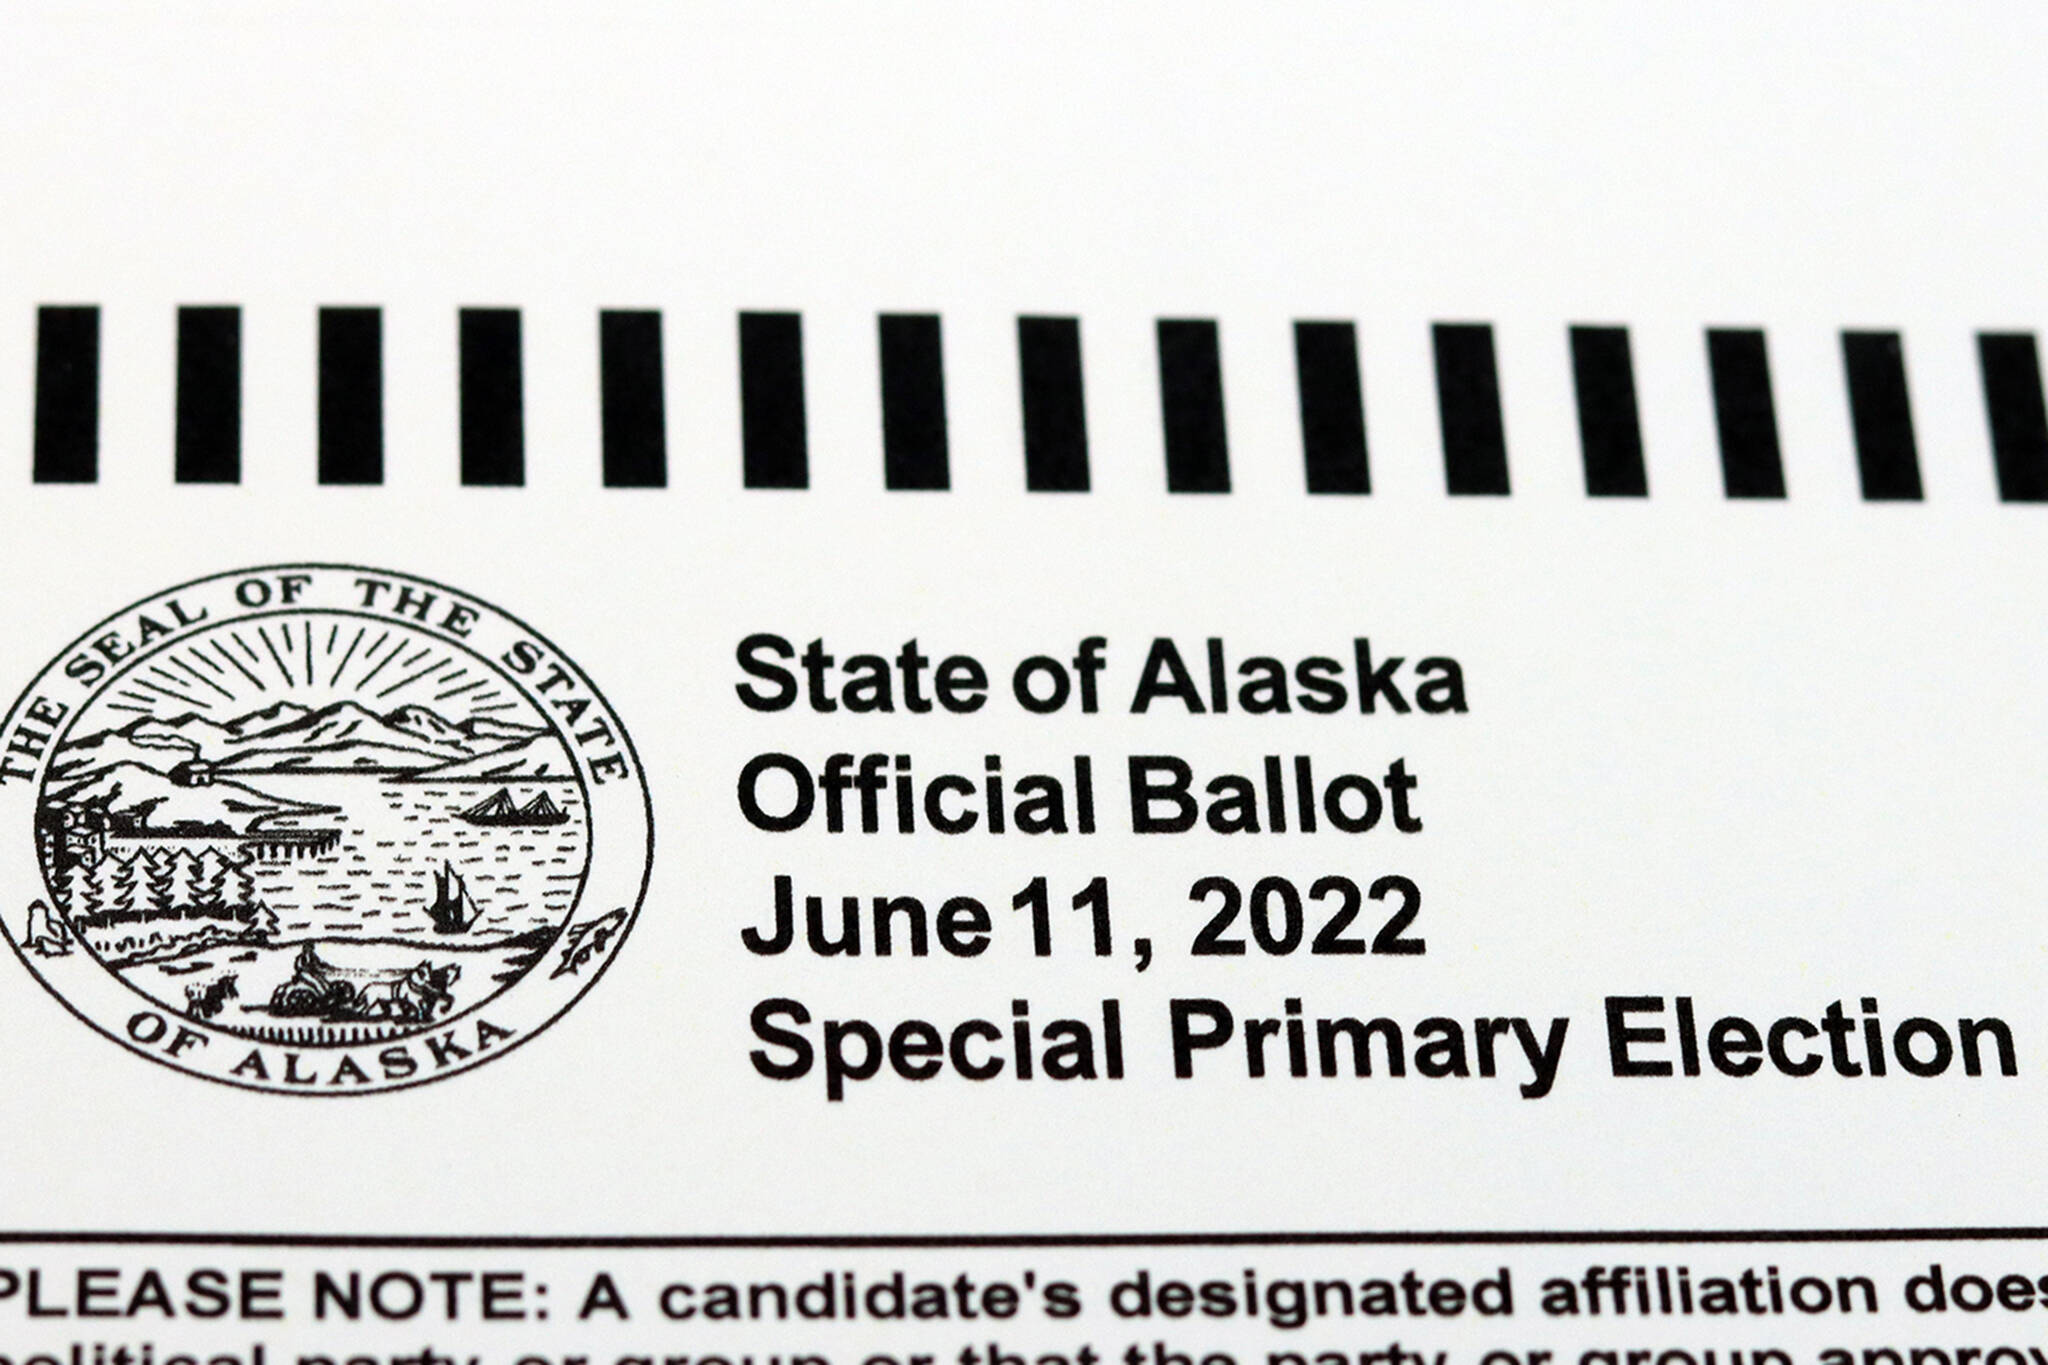 This photo shows the top of a ballot in the special primary election to fill the remainder of deceased U.S. Rep. Don Young’s term in the U.S. House of Representatives. In the primary, voters can only vote for one candidate. There will be a ranked choice special election on Aug. 16, which is the same date as the regular primary election. (Ben Hohenstatt / Juneau Empire)